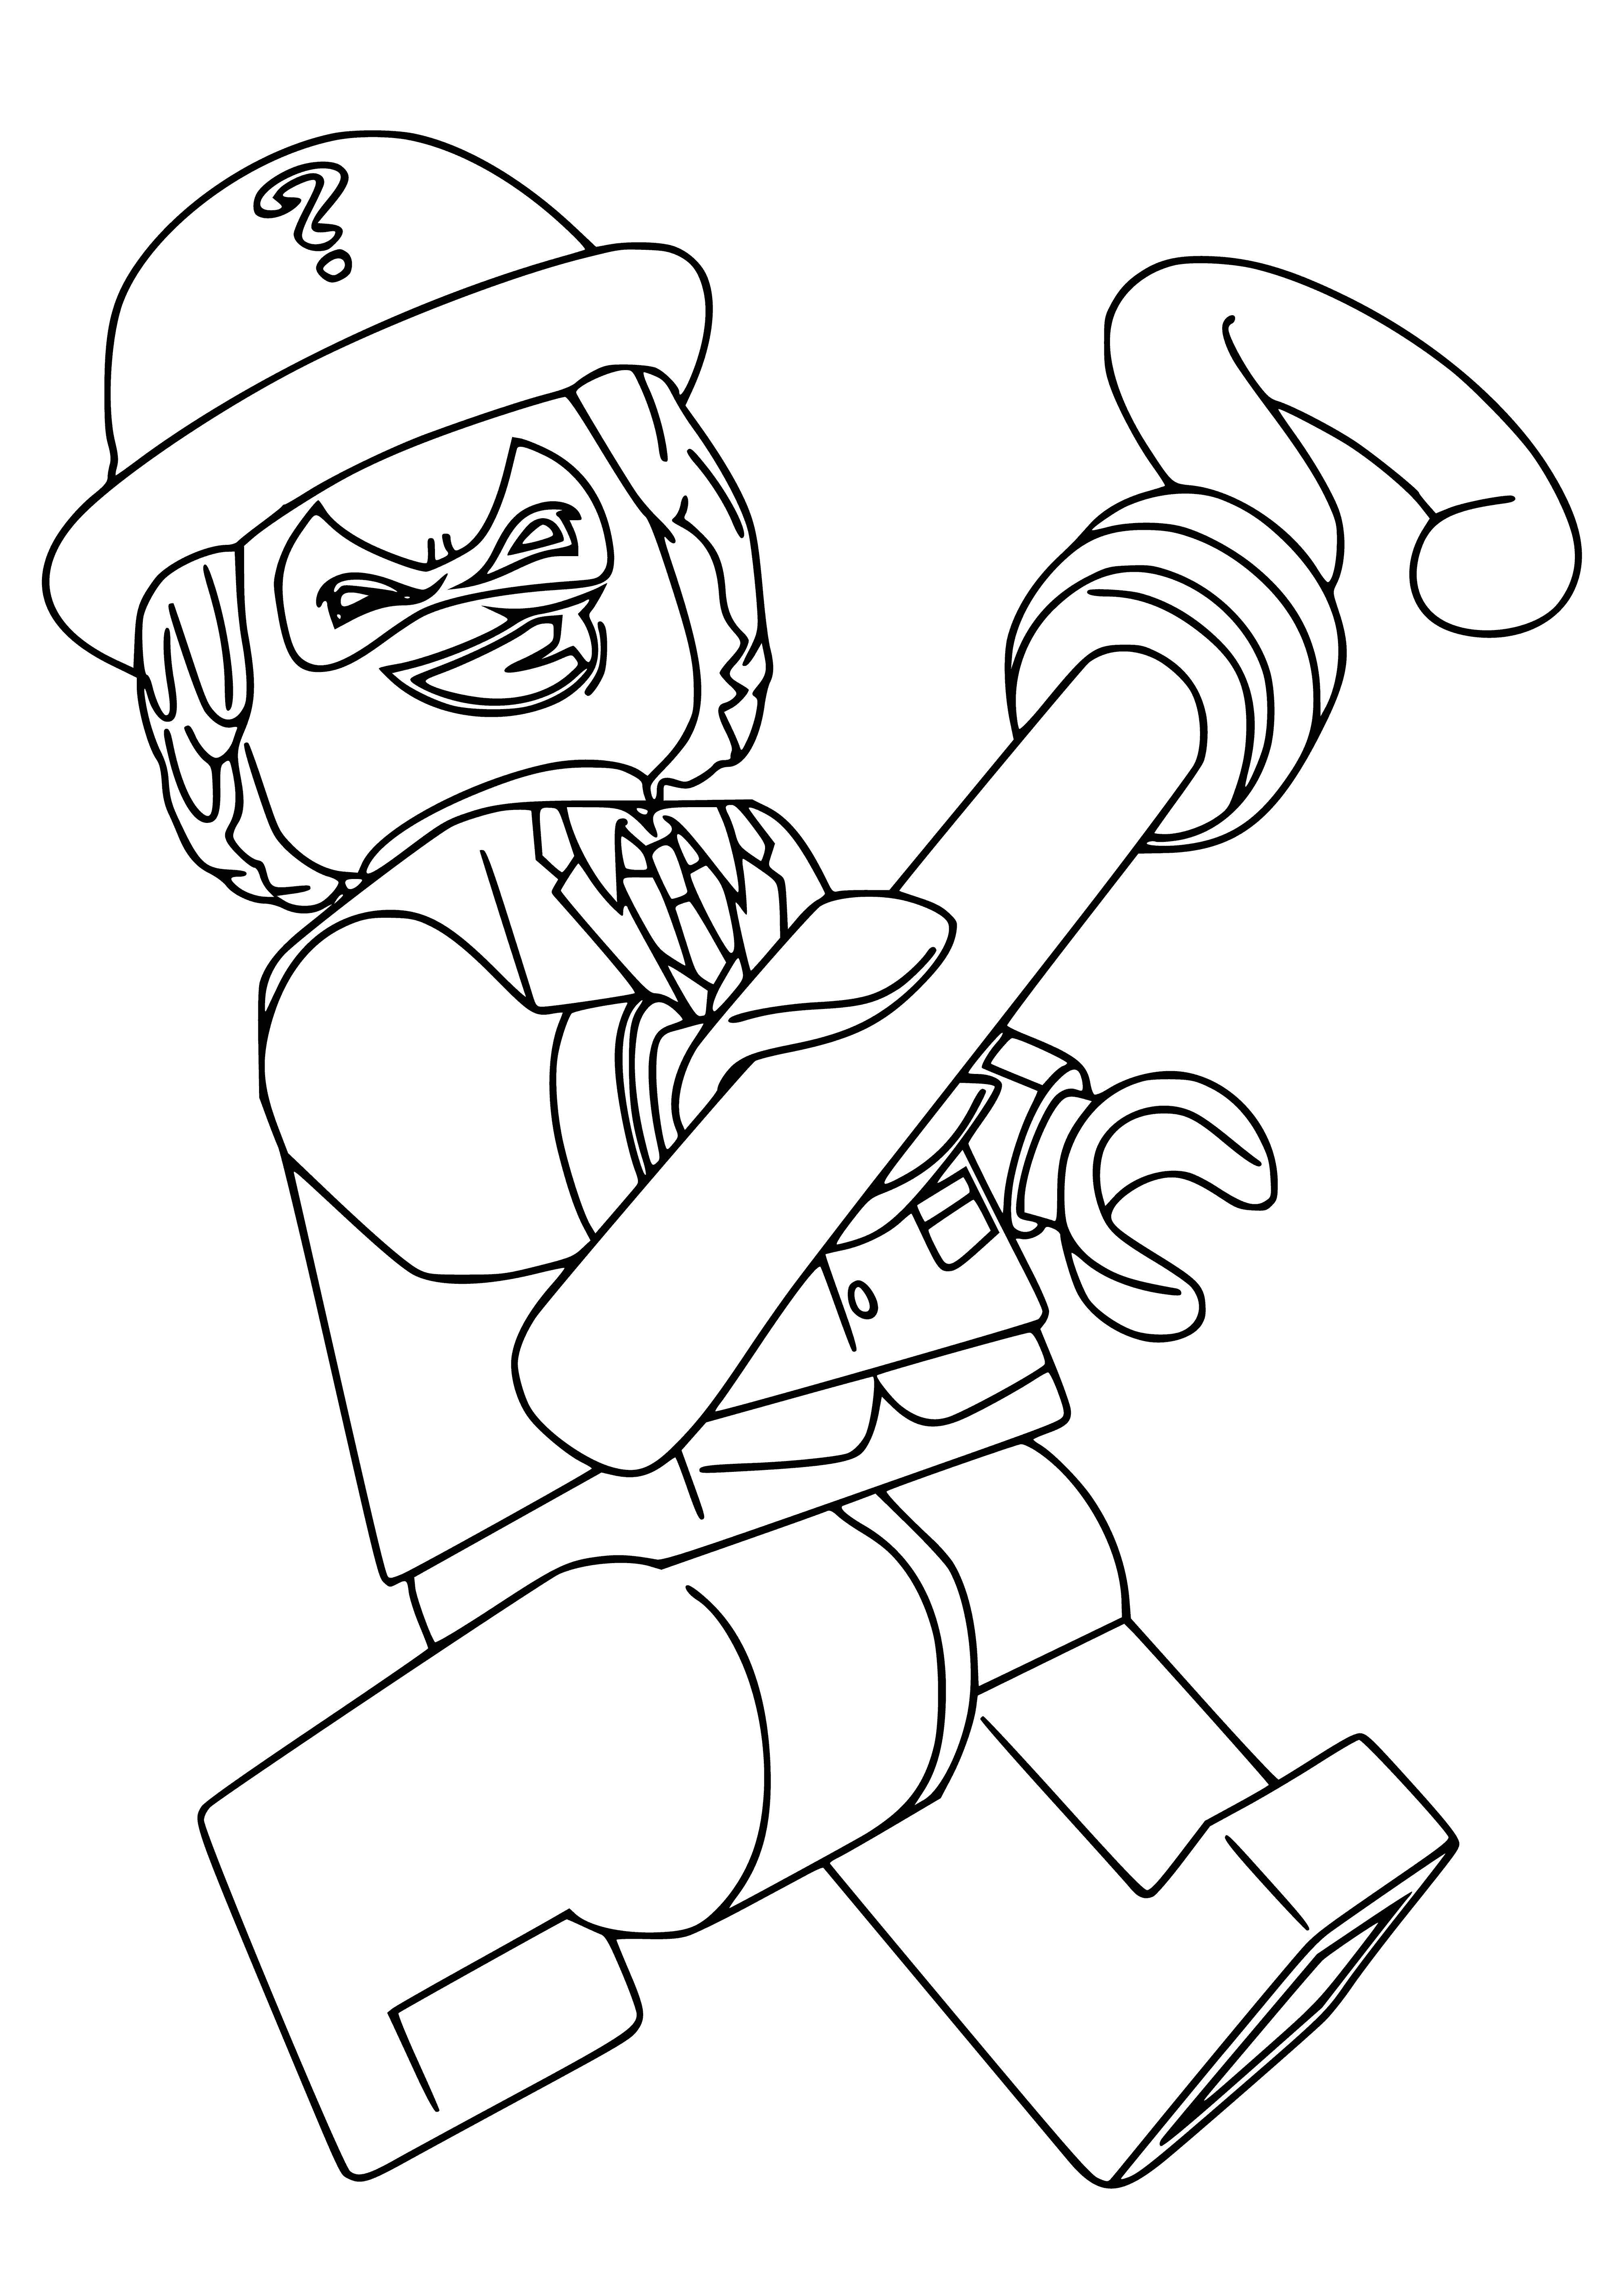 Riddler coloring page